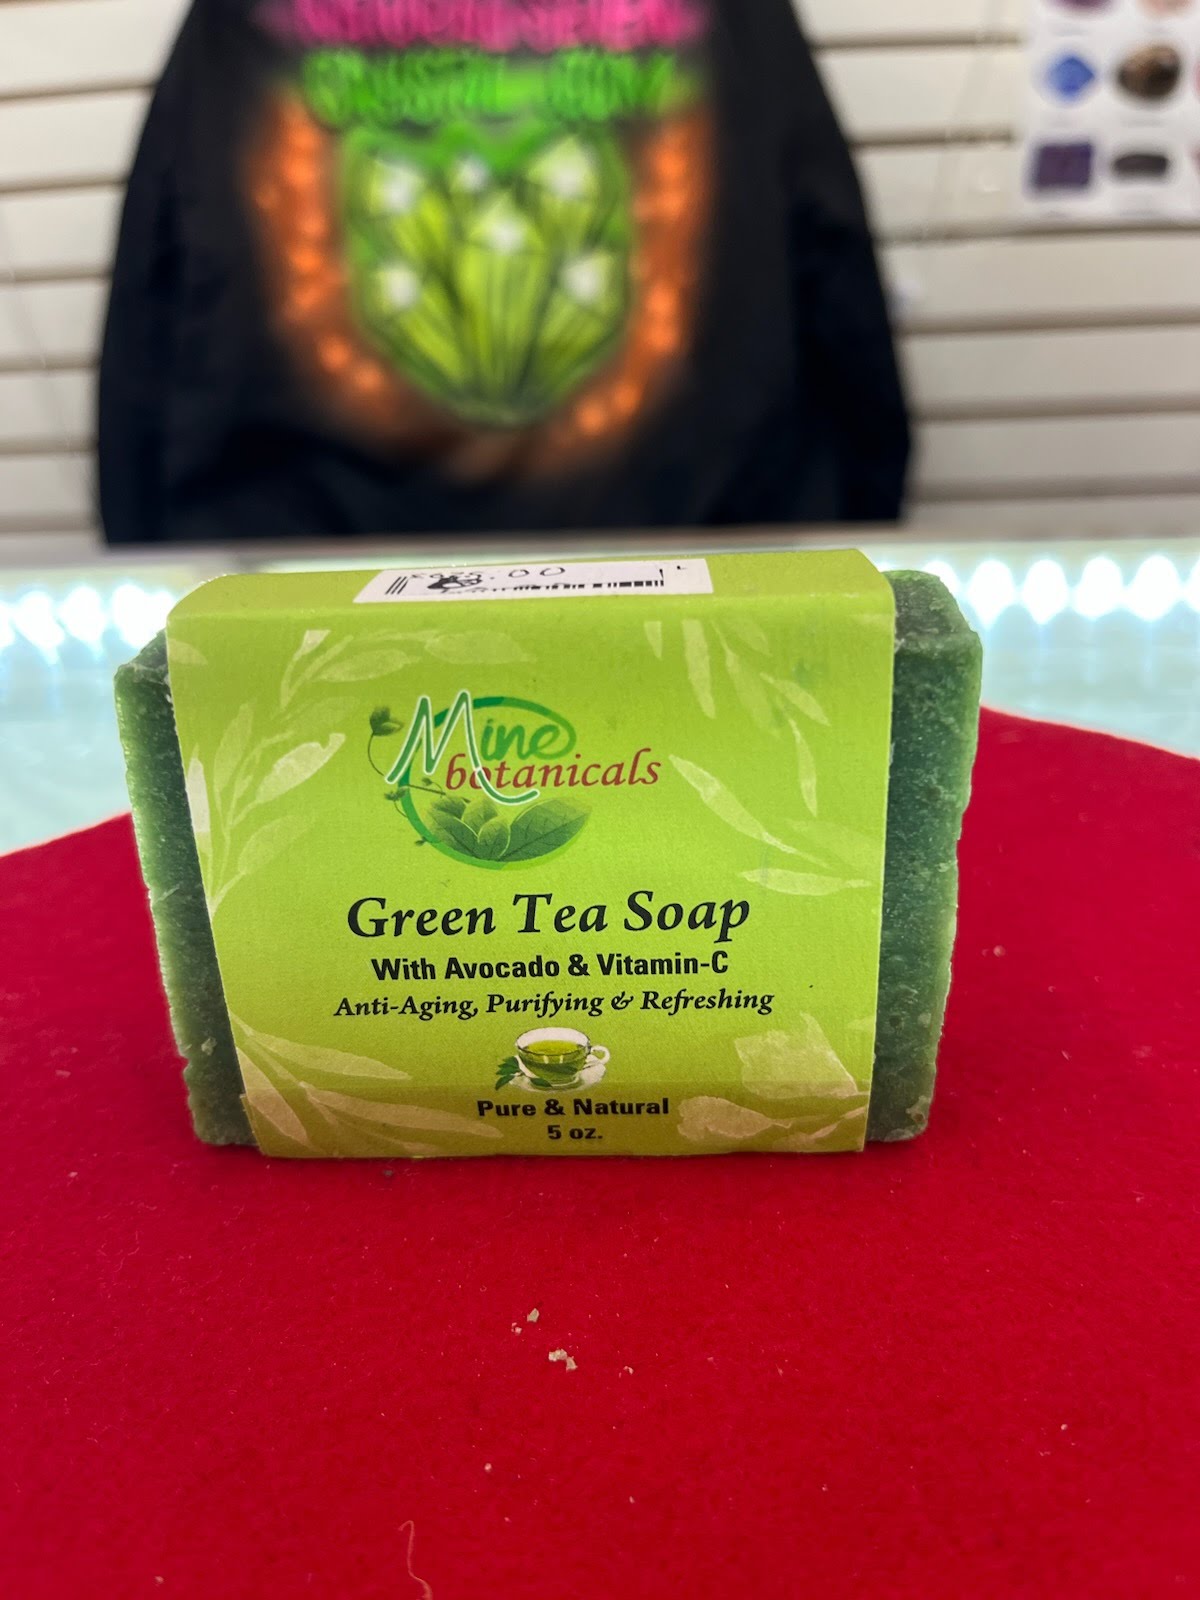 A green tea soap sitting on top of a red table.